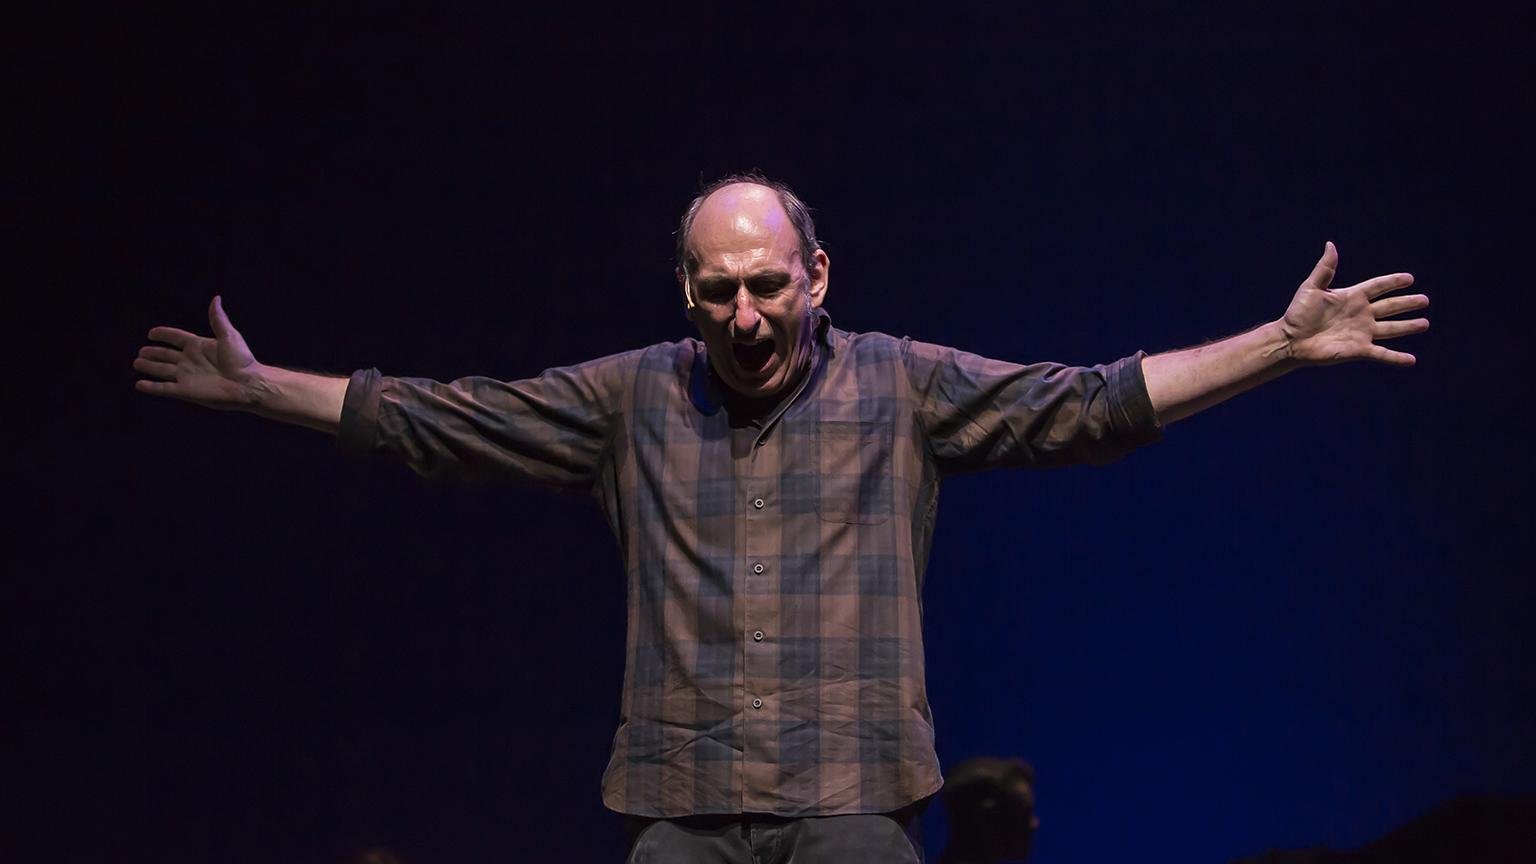 Playwright and performer David Cale in his world premiere solo musical memoir “We’re Only Alive for A Short Amount of Time,” directed by Robert Falls at Goodman Theatre. (Credit: Liz Lauren) 